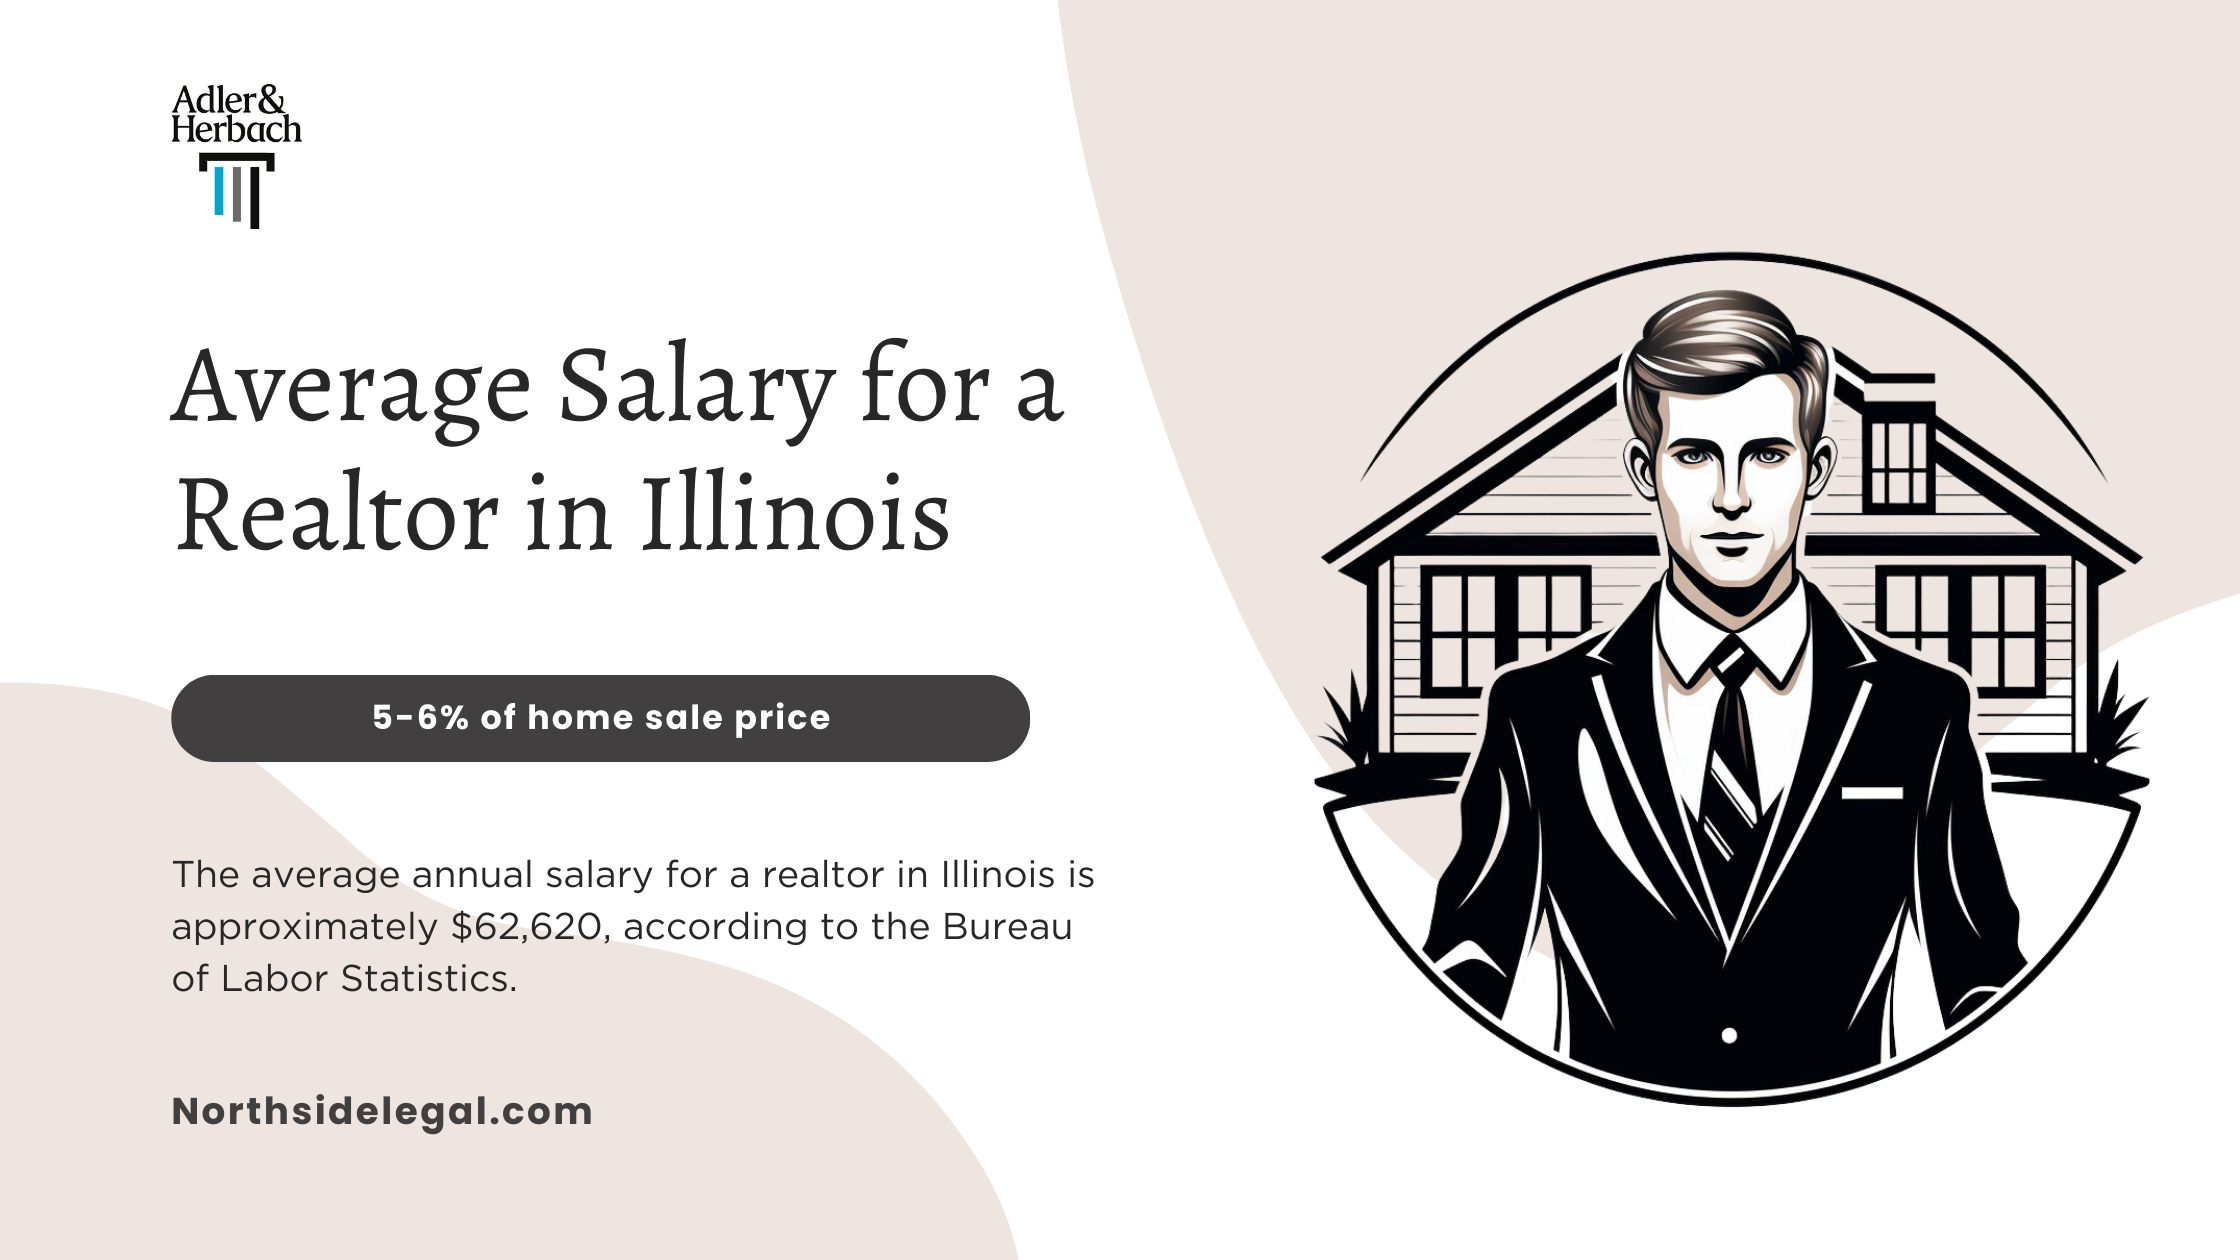 What is the Average Salary for a Realtor in Illinois?